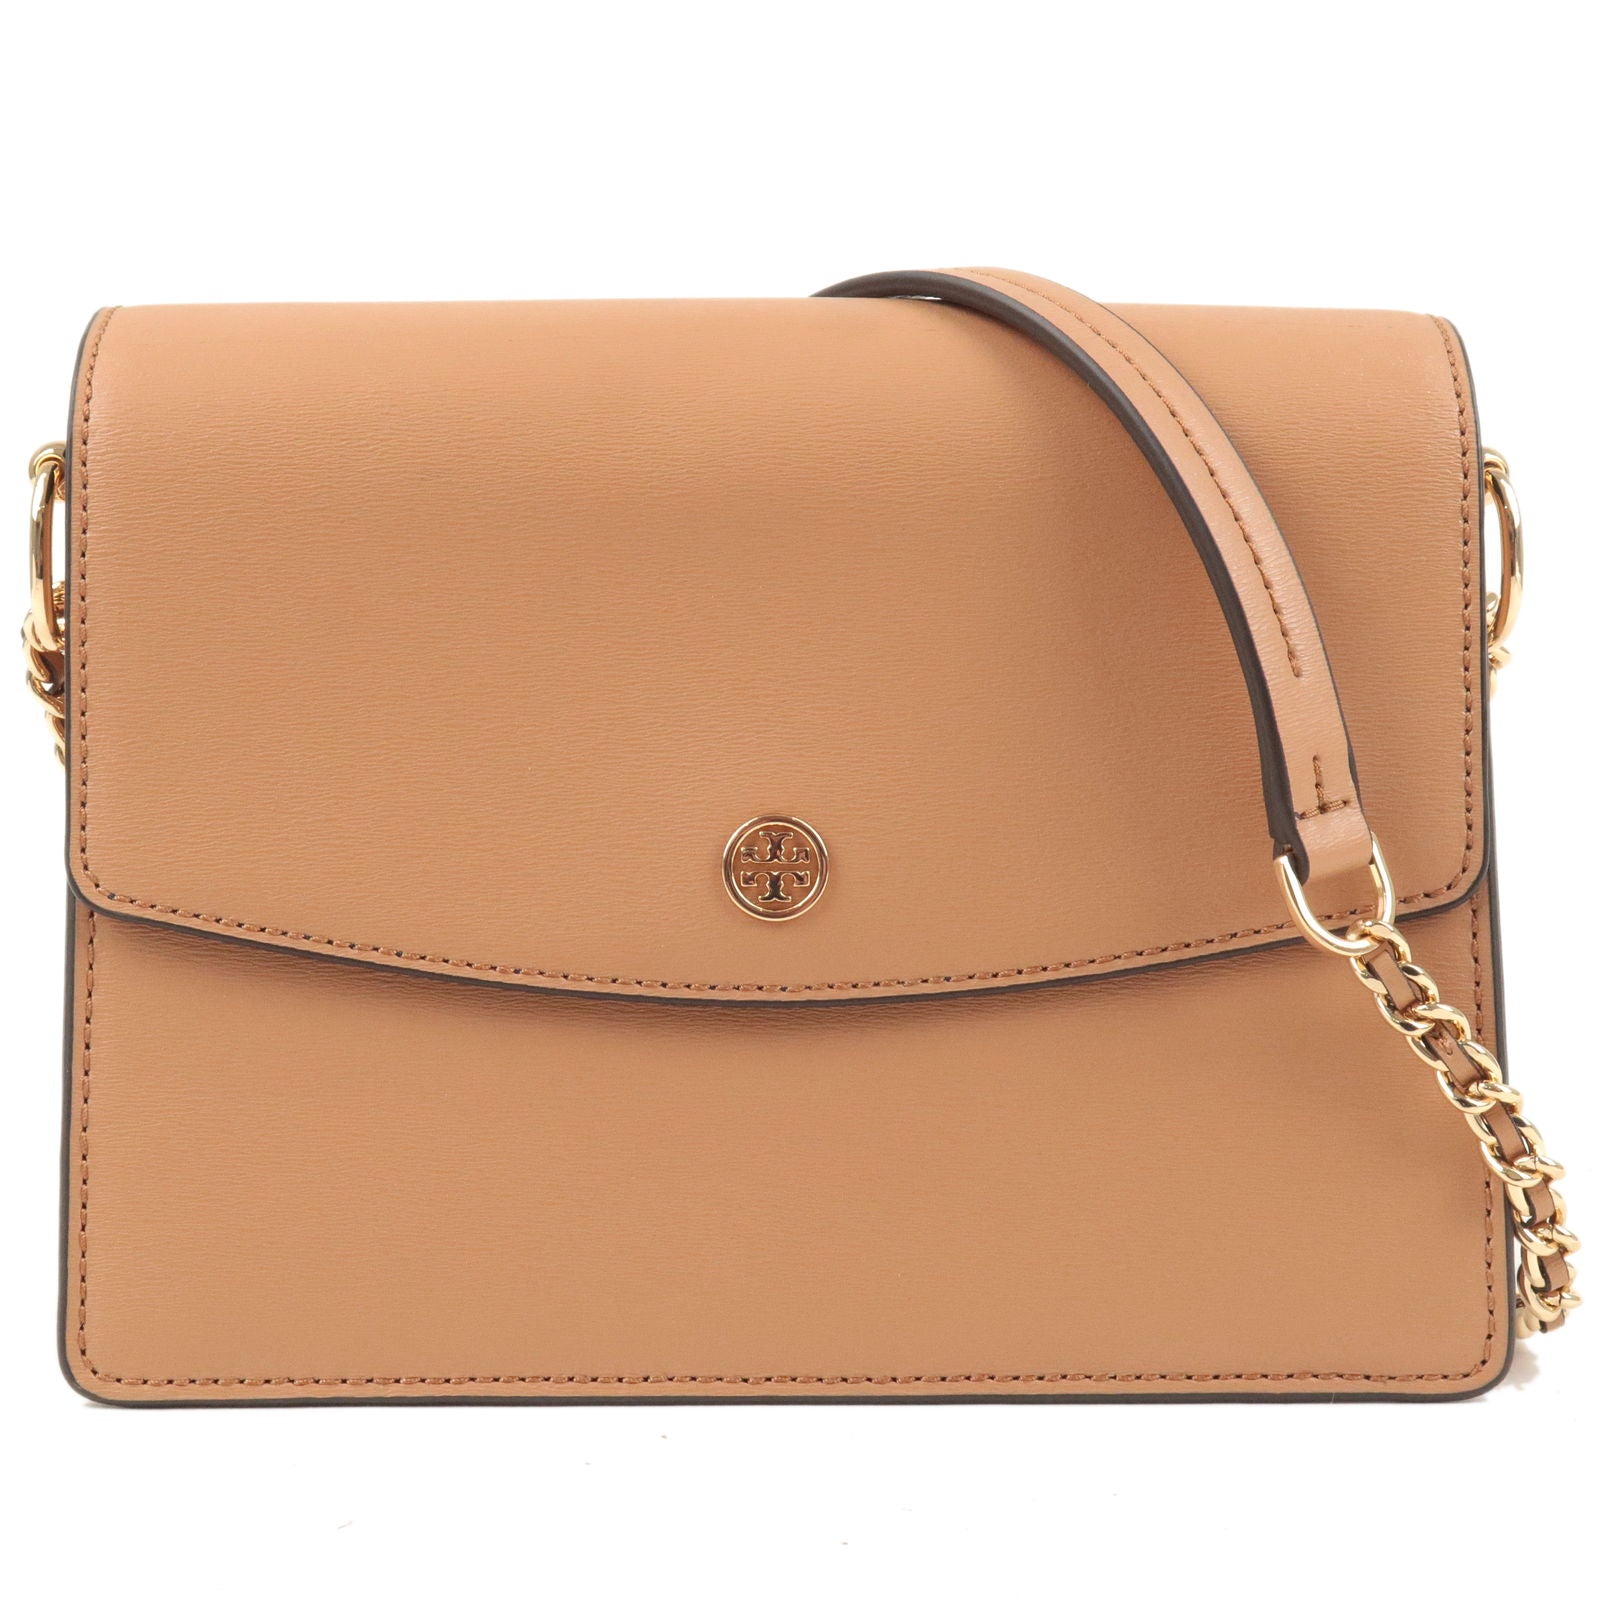 Tory-Burch-Leather-Flap-Chain-Shoulder-Bag-Brown-Beige